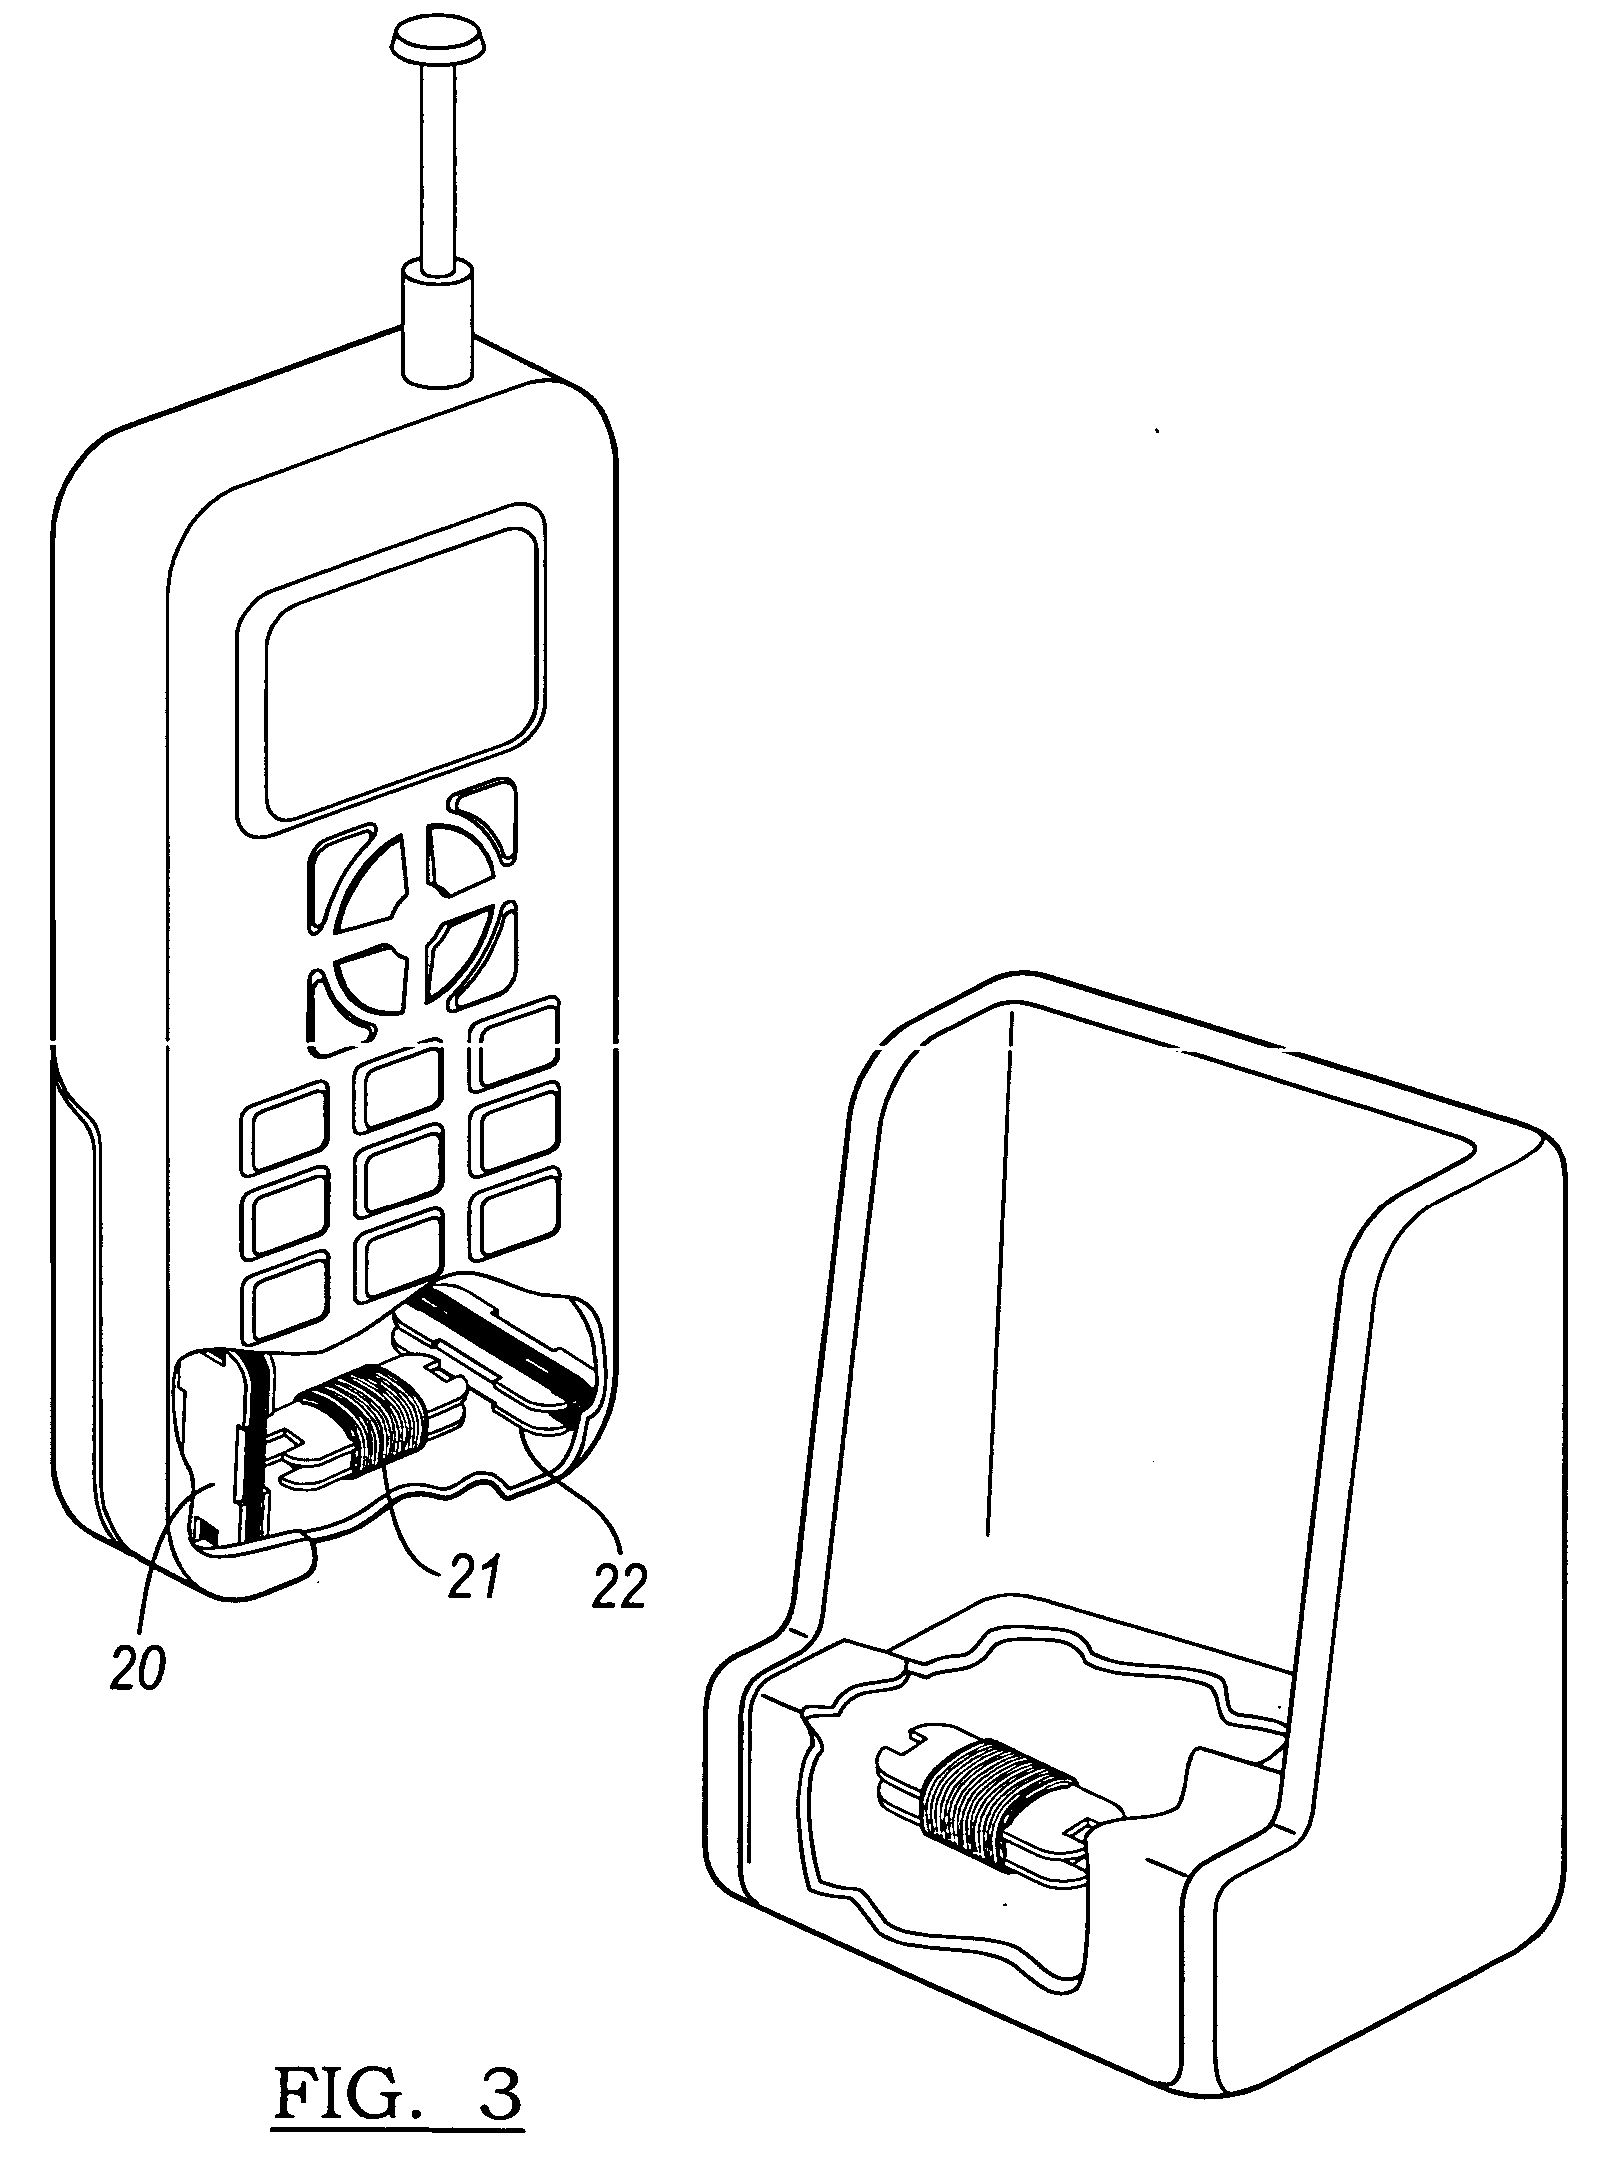 Apparatus for inductively recharging batteries